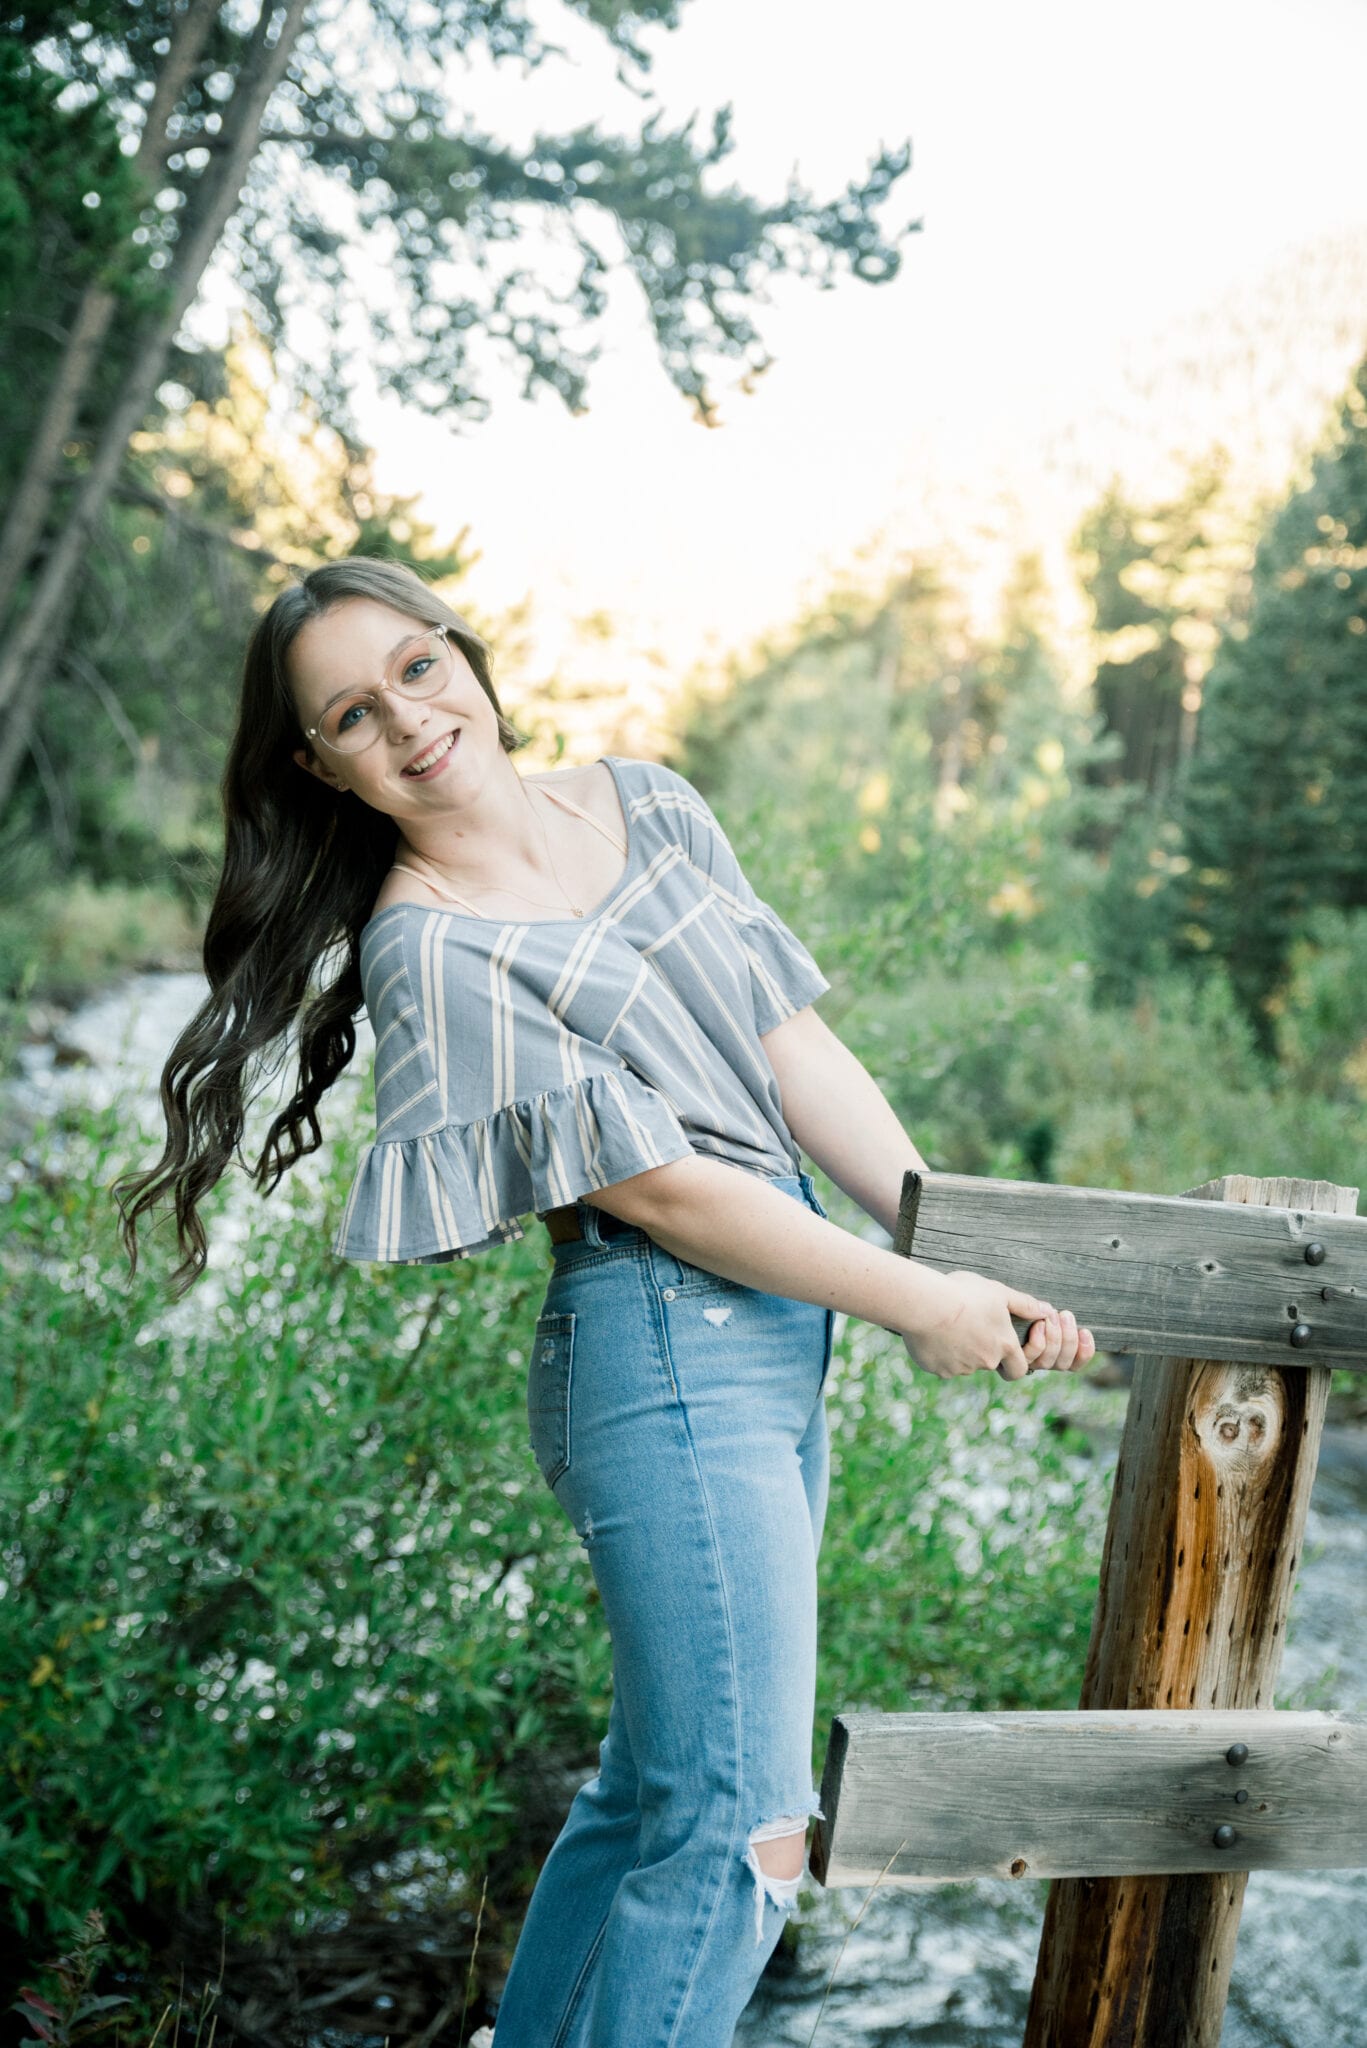 Leighanne.classof2019 159 - Leighanne - Class of 2019